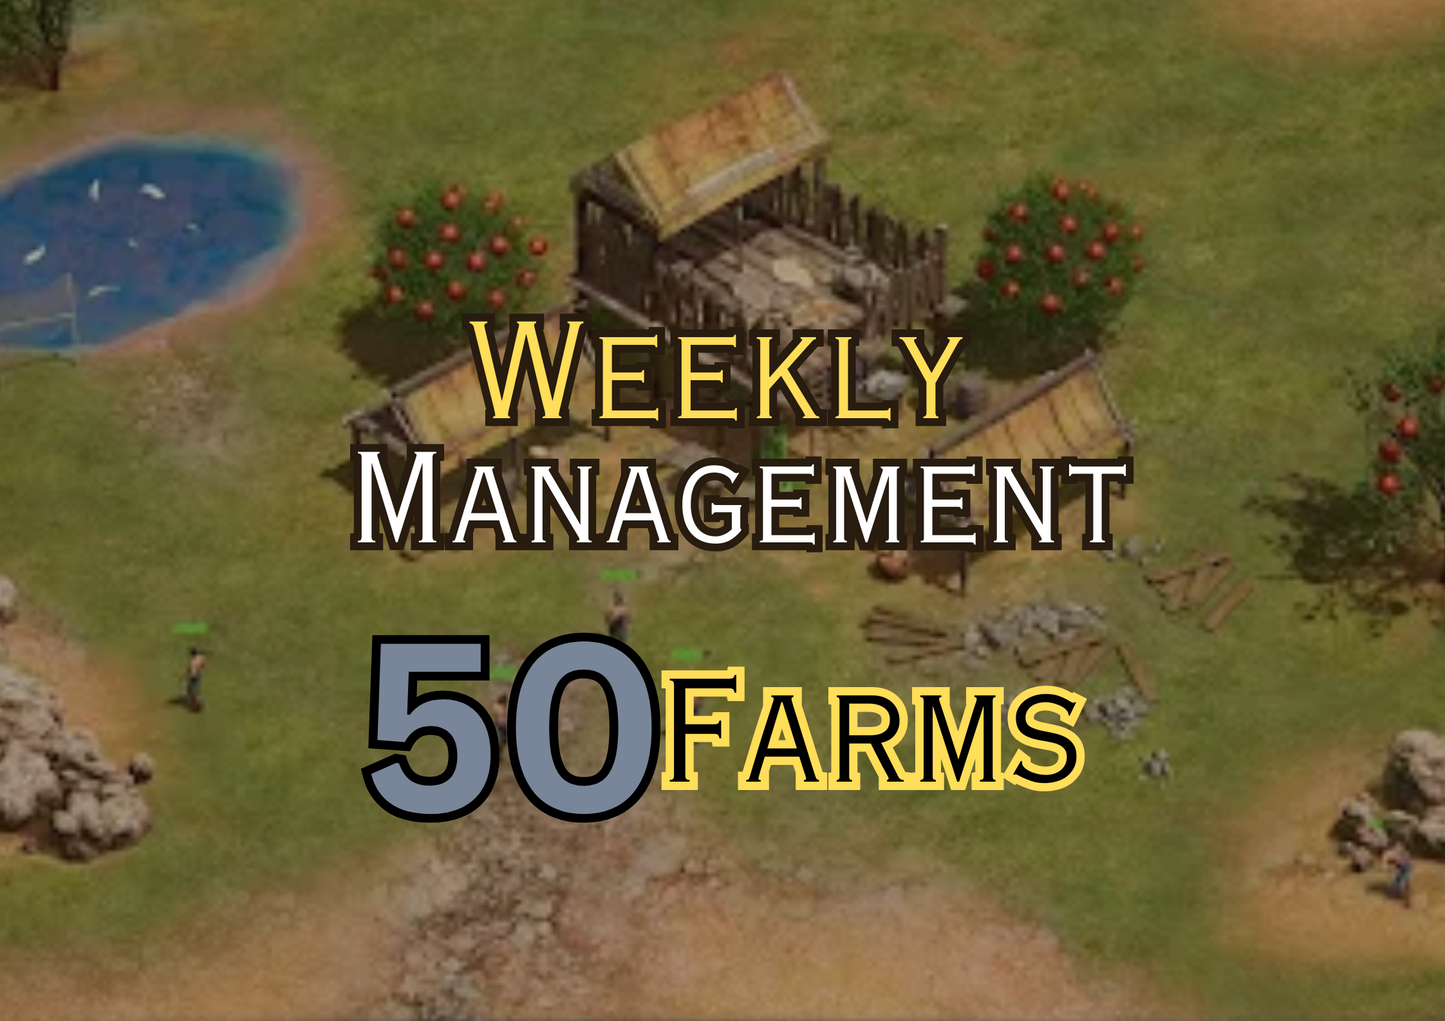 Weekly Management for 50 farms